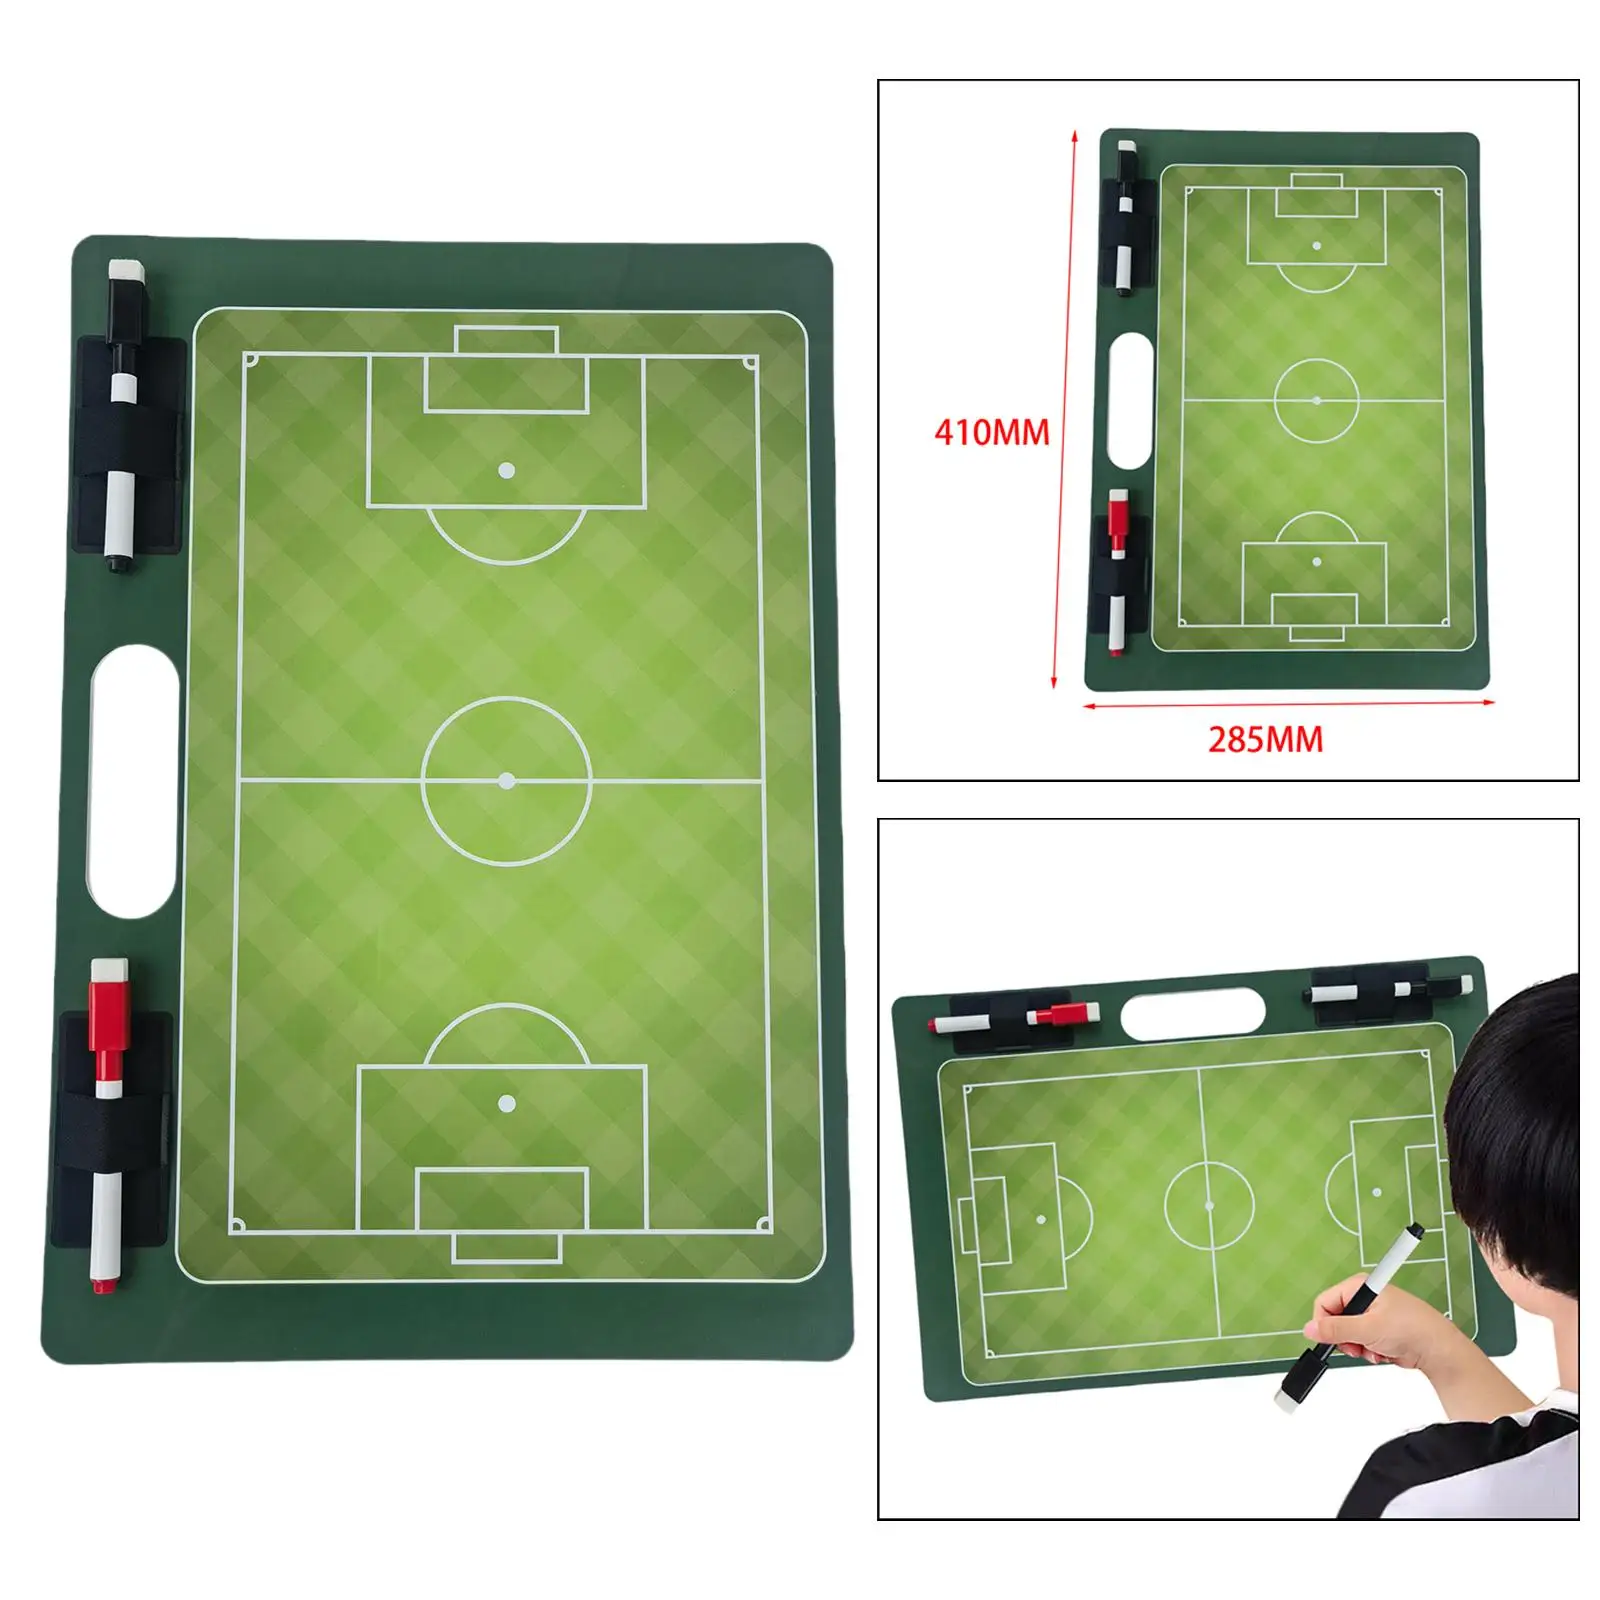 Football Coaching Board Trainer Aid Marker Pen Marker Board Coaches Clipboard Soccer for Practice Coach Strategy Plan Training